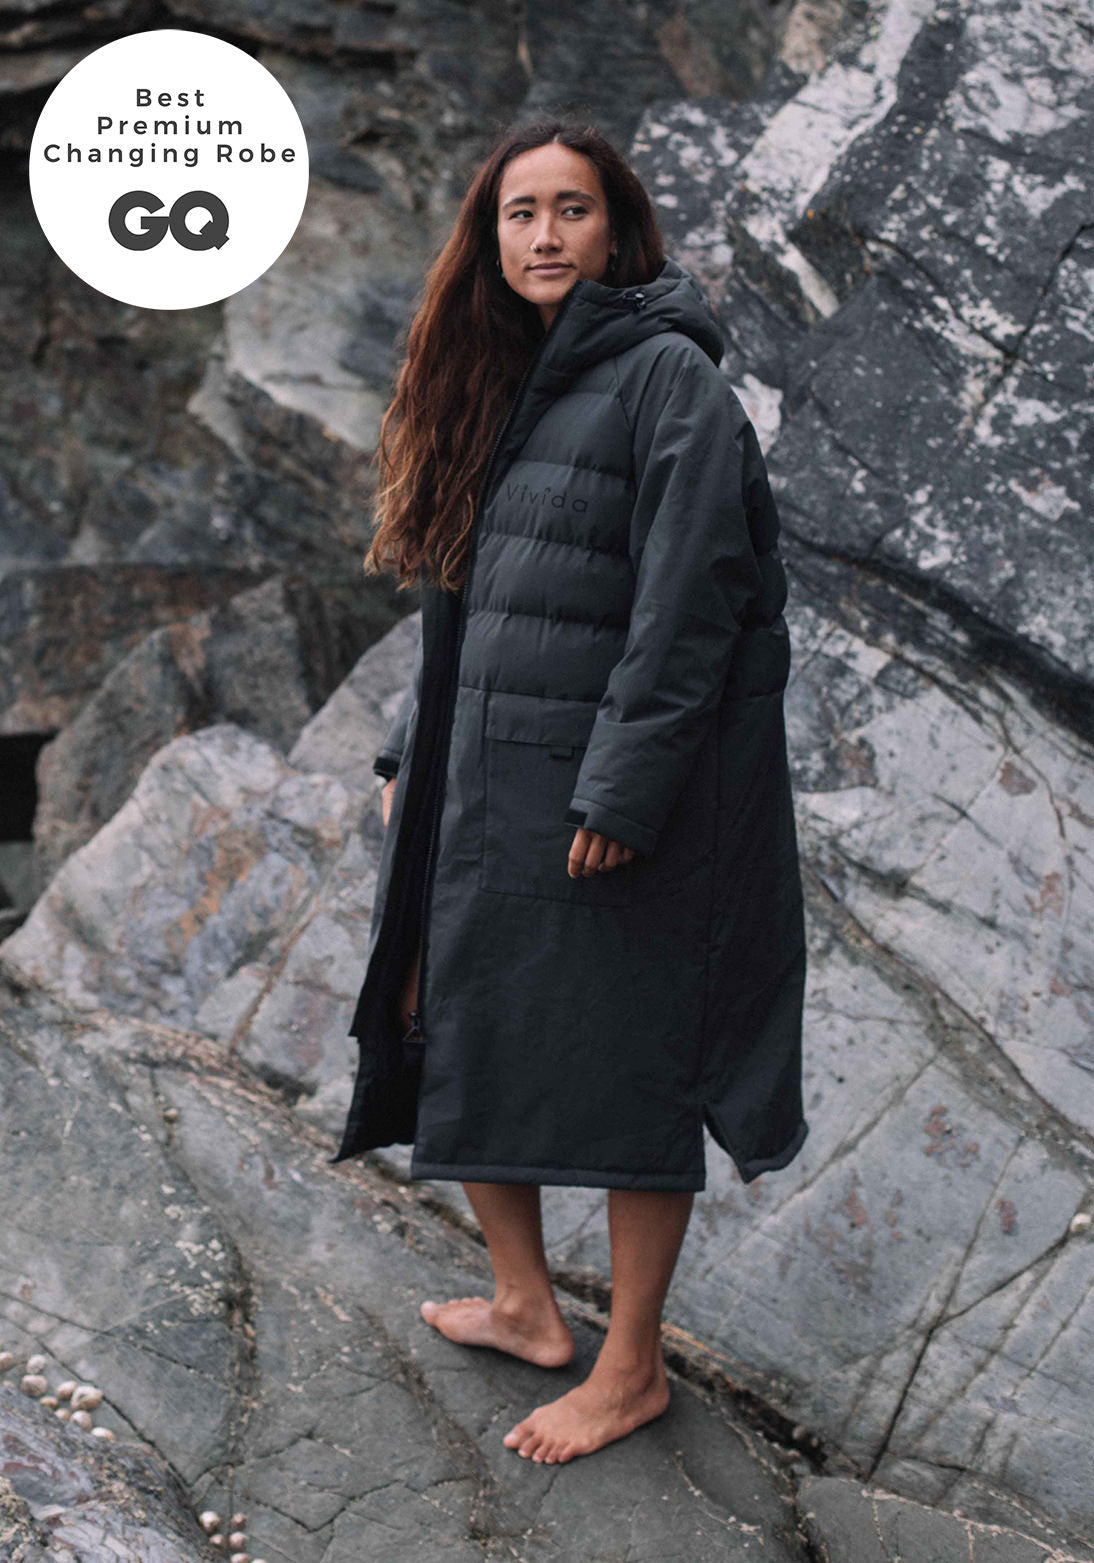 Woman wearing a Vivida Lifestyle All Weather Puffer Changing Robe, Fossil Grey Dry Robe for swimming standing on a rock. Sticker: Best Premium Changing Robe - GQ magazine.